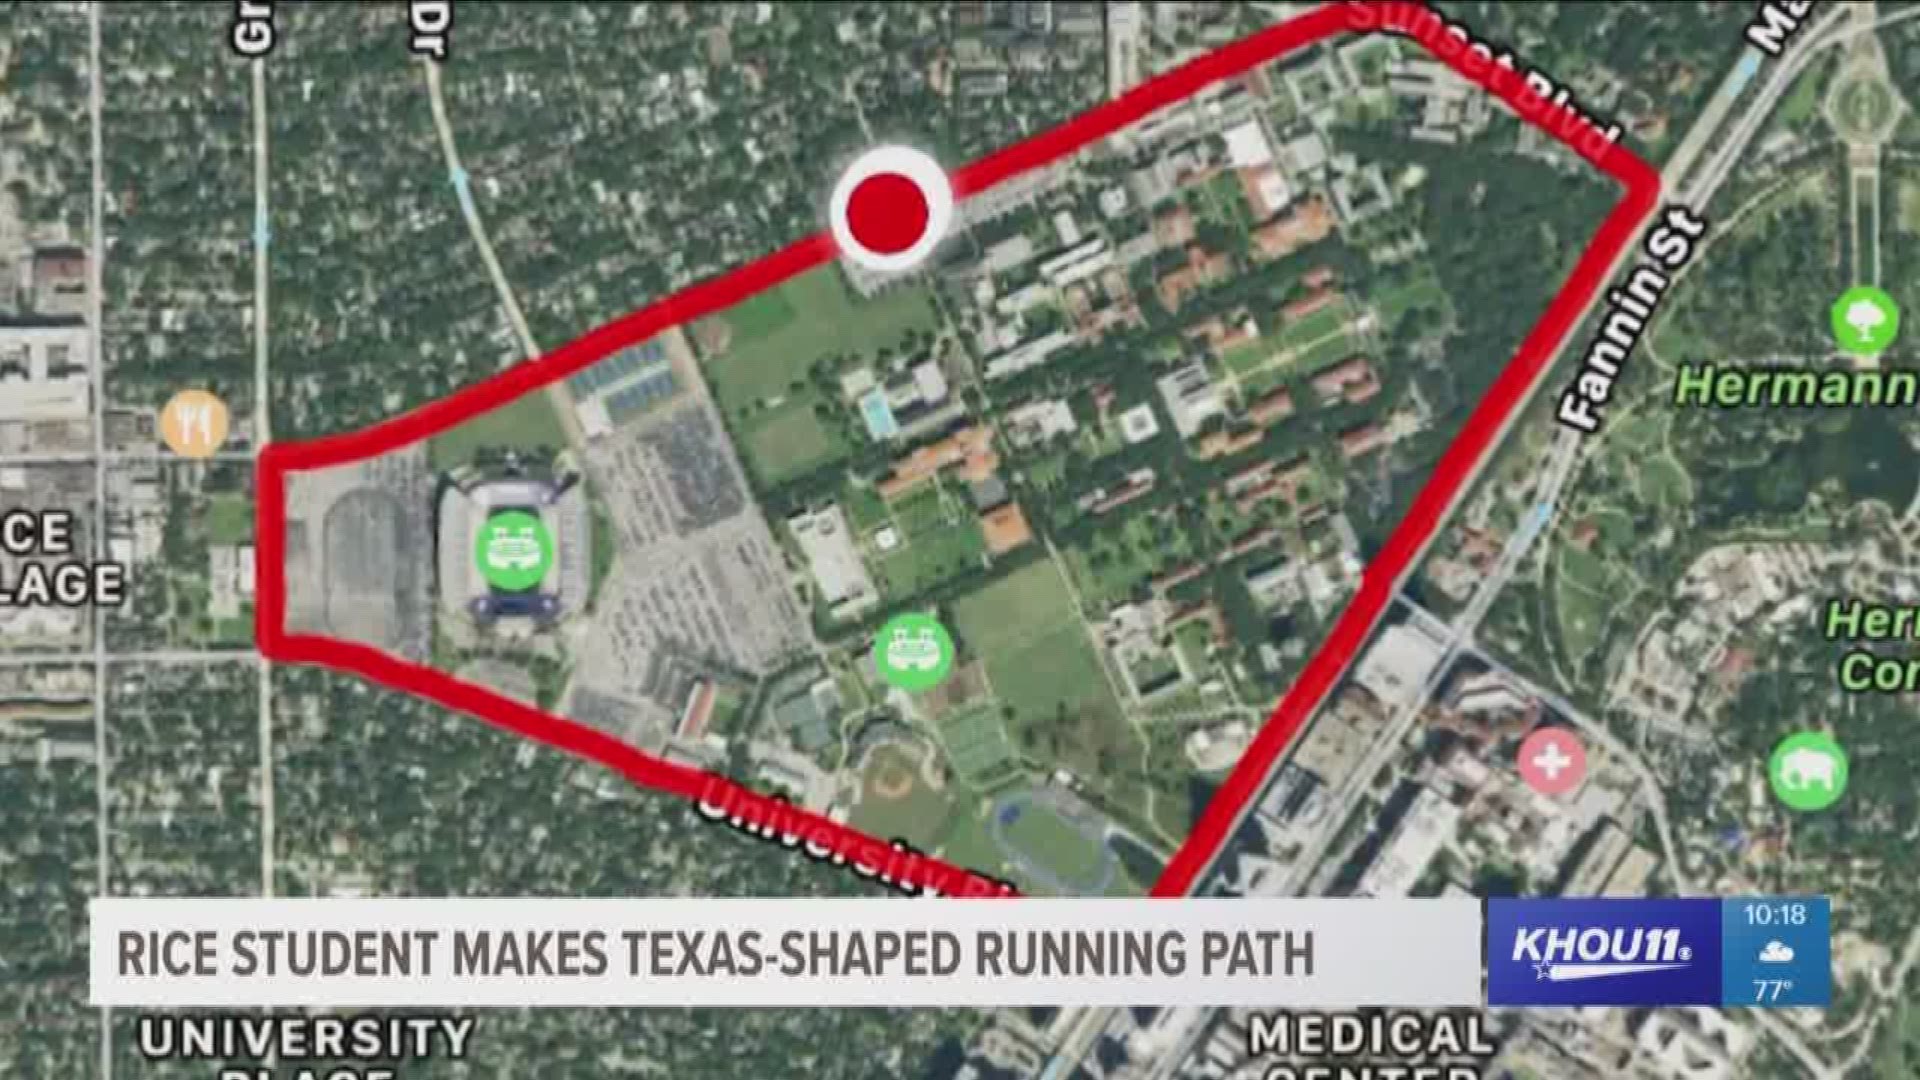 For the past six months, Rustam Zufarov has been trying to perfect his running route to resemble the shape of Texas.